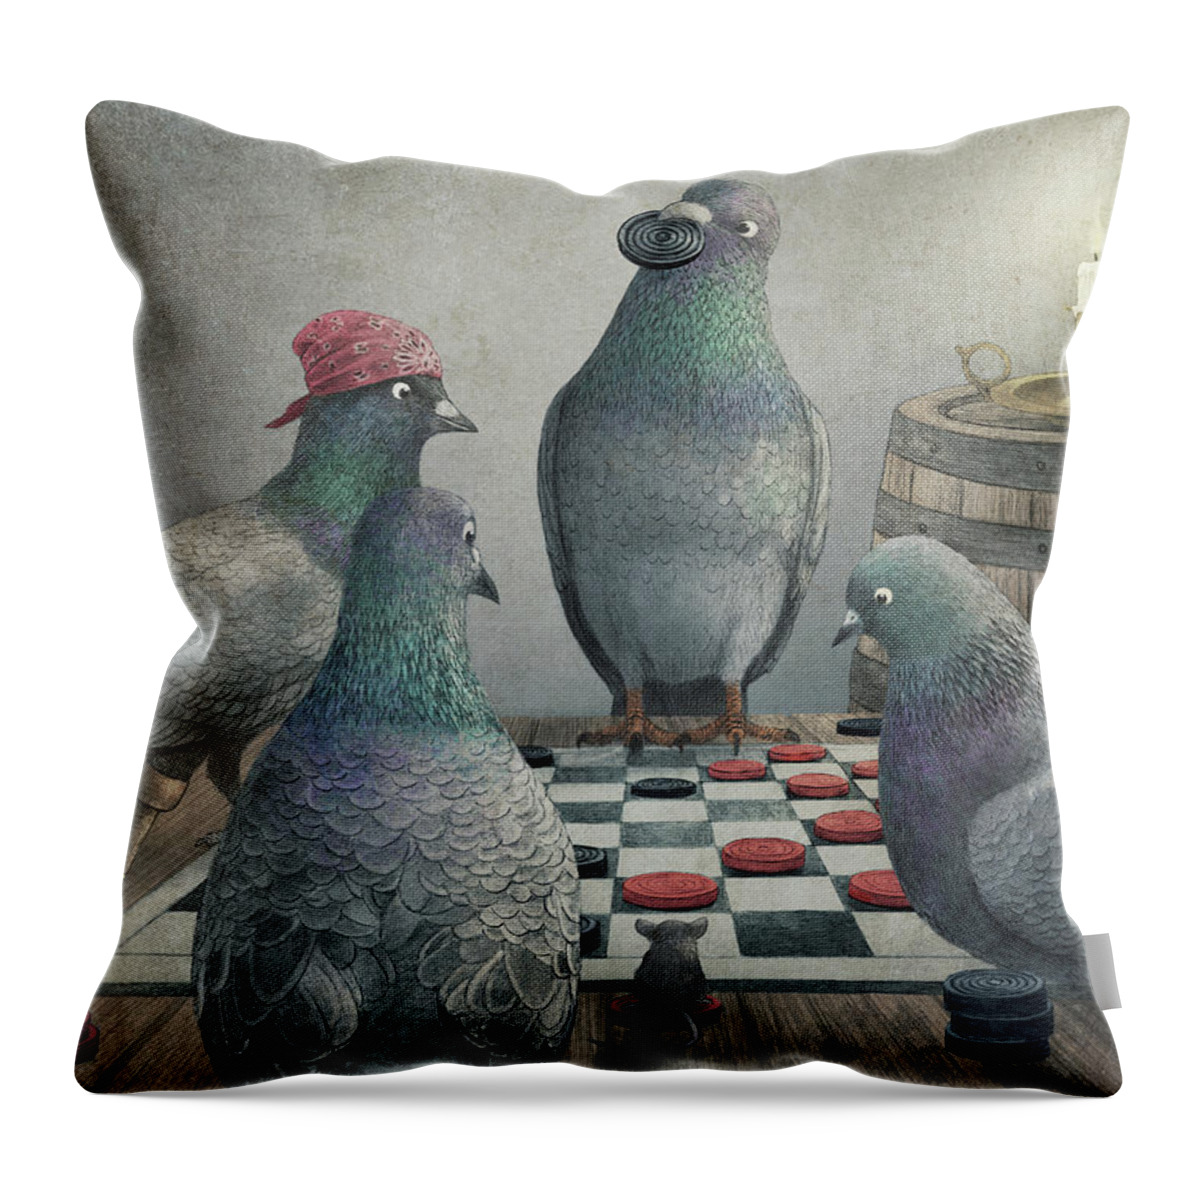 Pigeons Throw Pillow featuring the drawing Pigeons Playing Checkers by Eric Fan